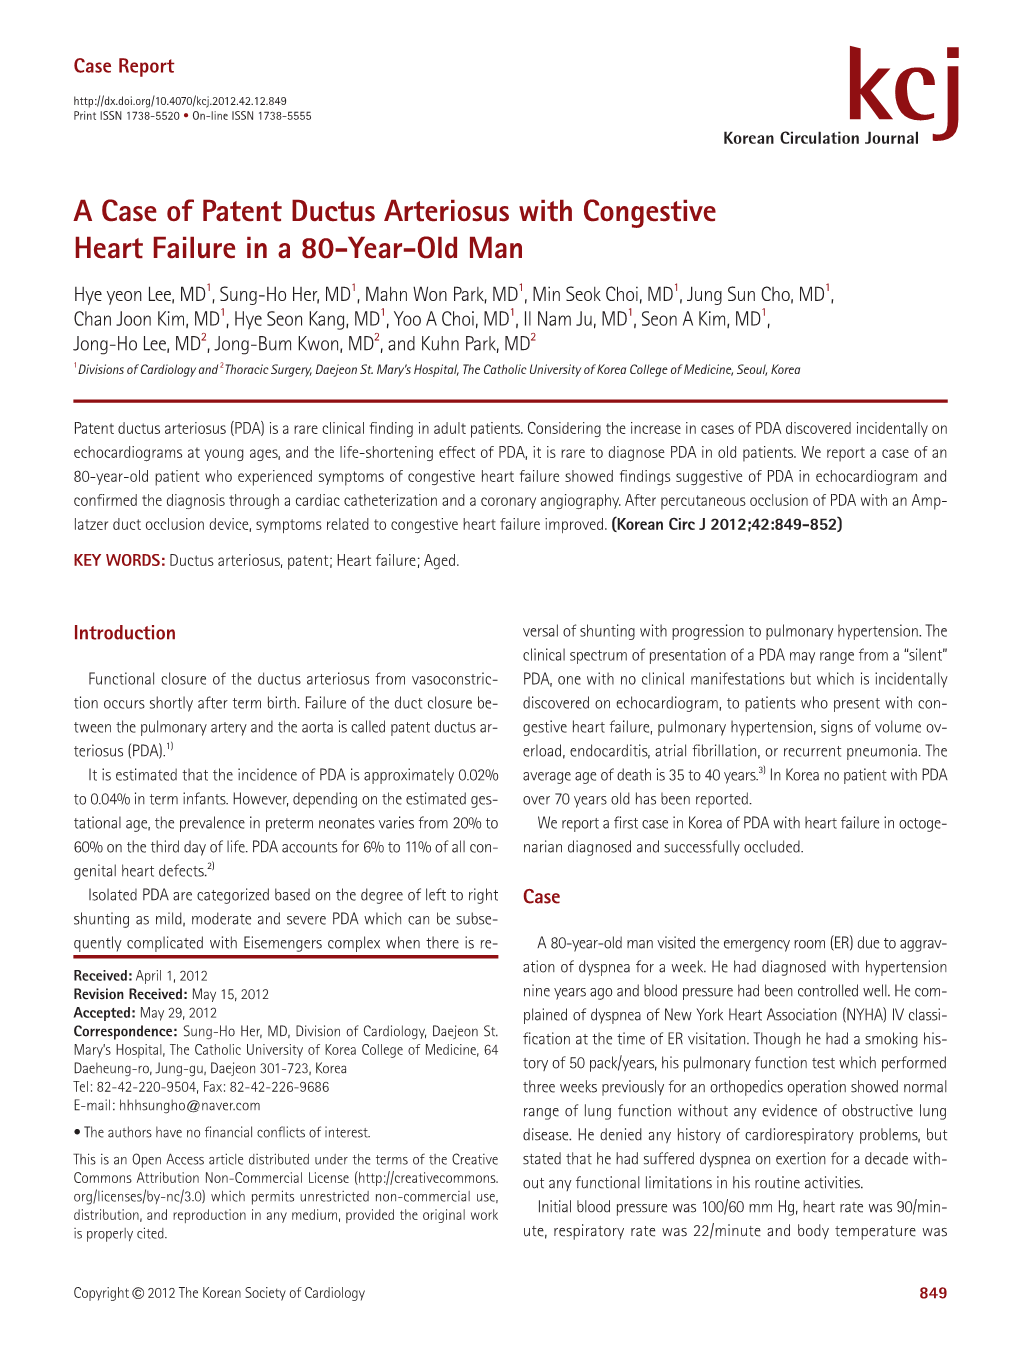 A Case of Patent Ductus Arteriosus with Congestive Heart Failure in A